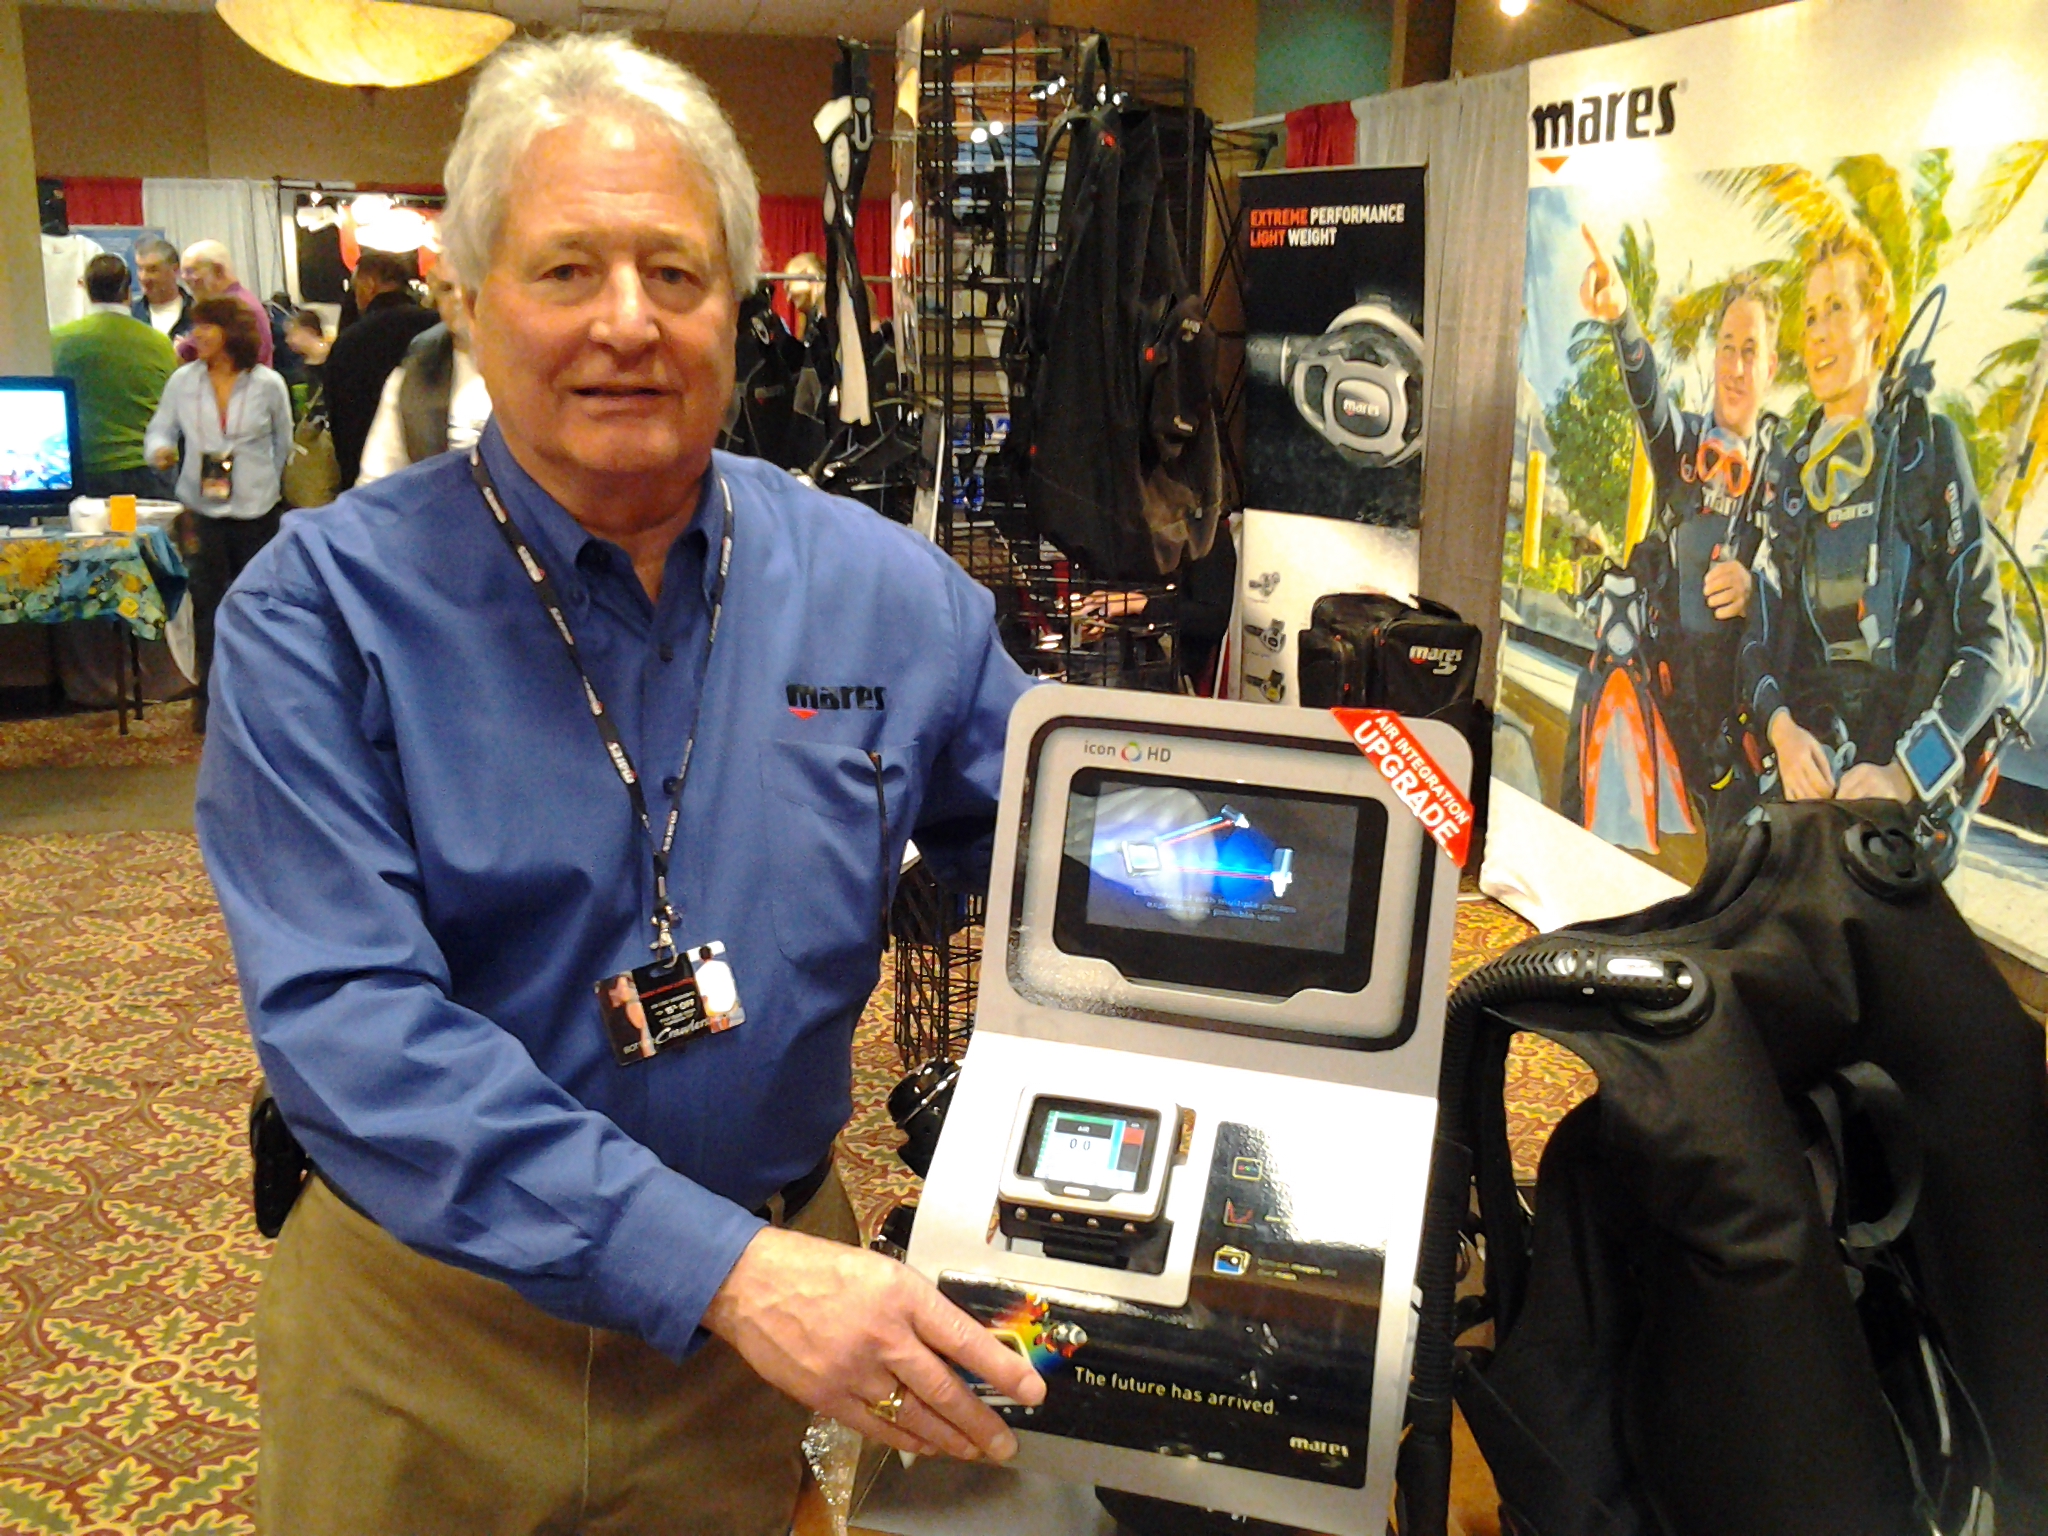 The Icon HD PDC from Mares @ Baltimore Dive Show